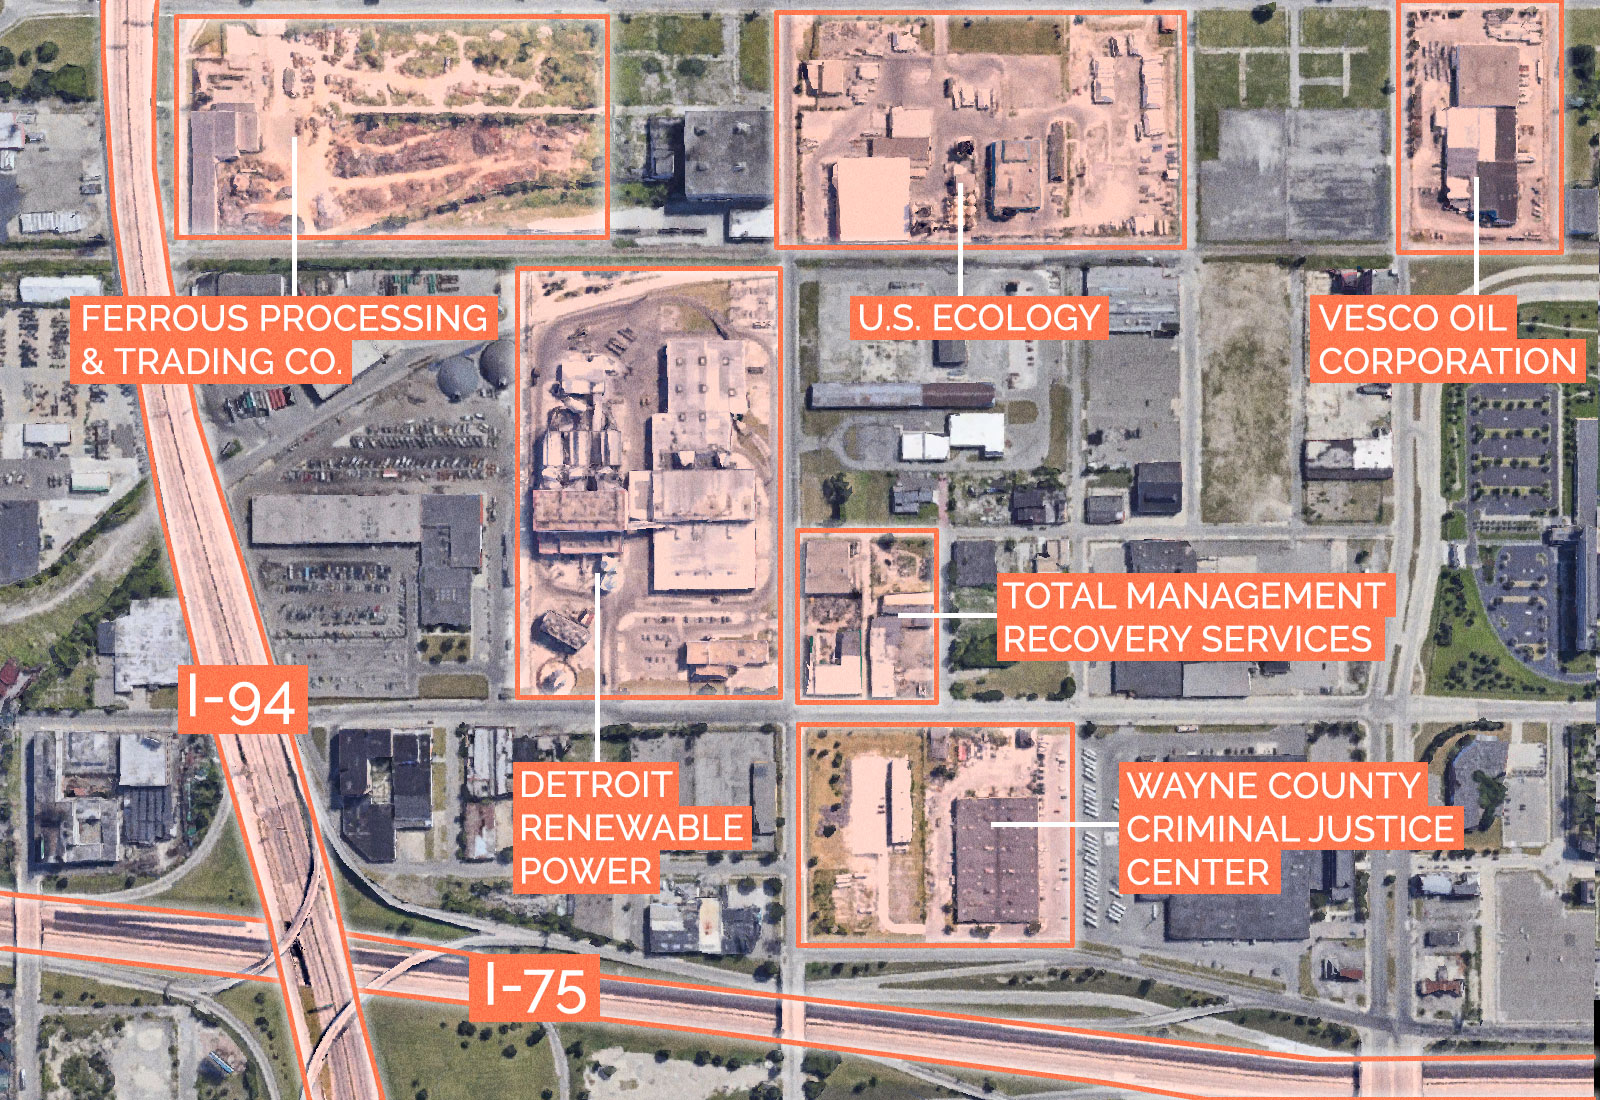 An aerial map of various sites around Wayne County Criminal Justice Center in Detroit, Michigan